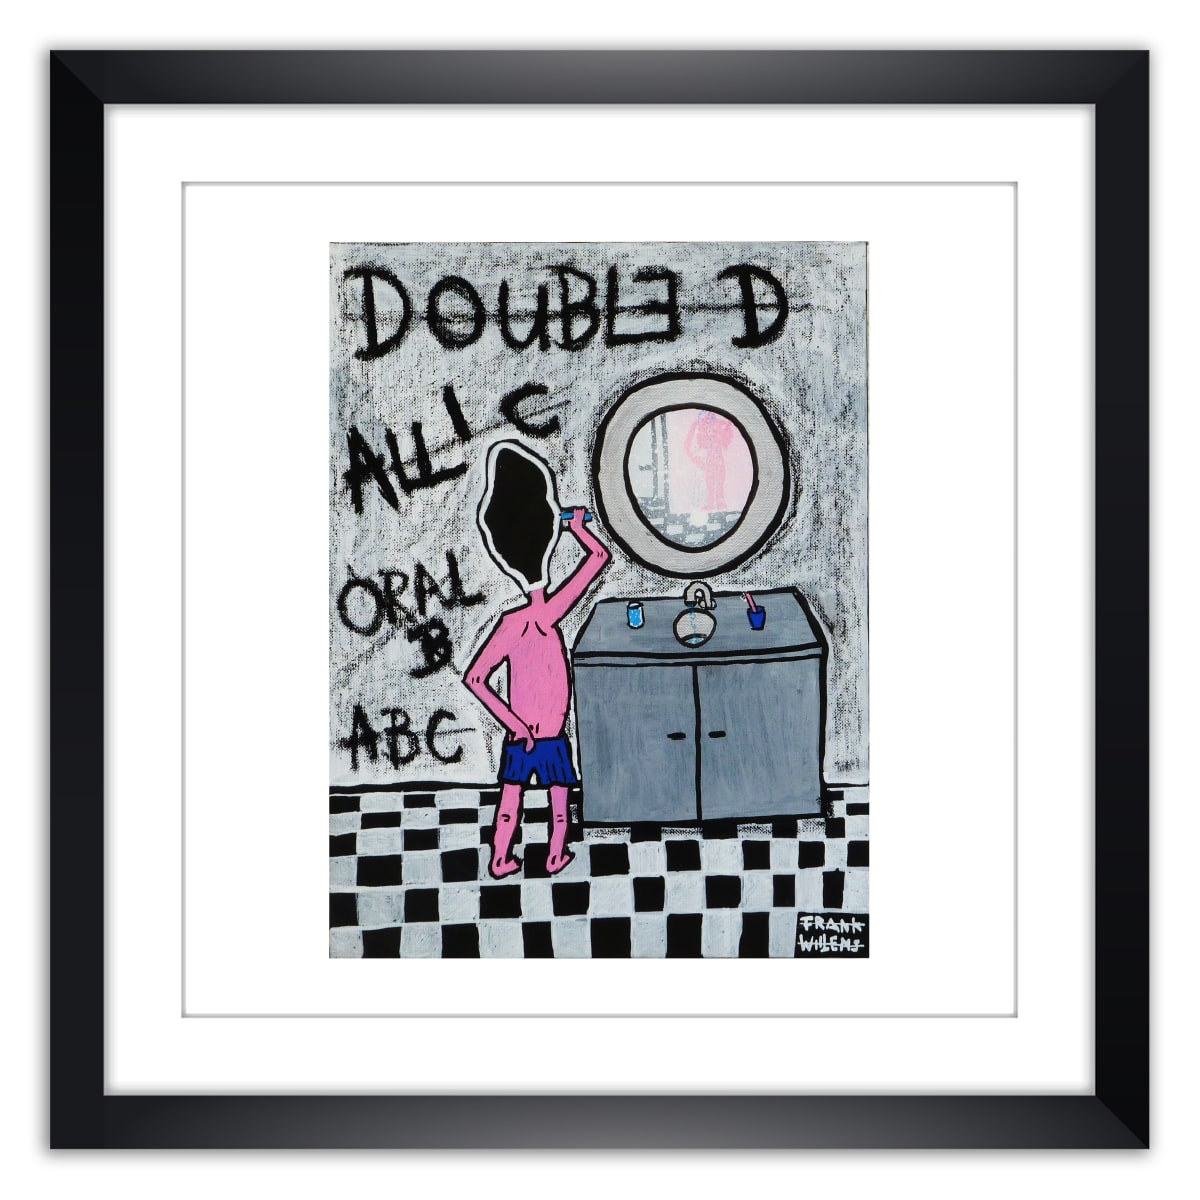 Limited prints - ABC DOUBLE D framed - Frank Willems